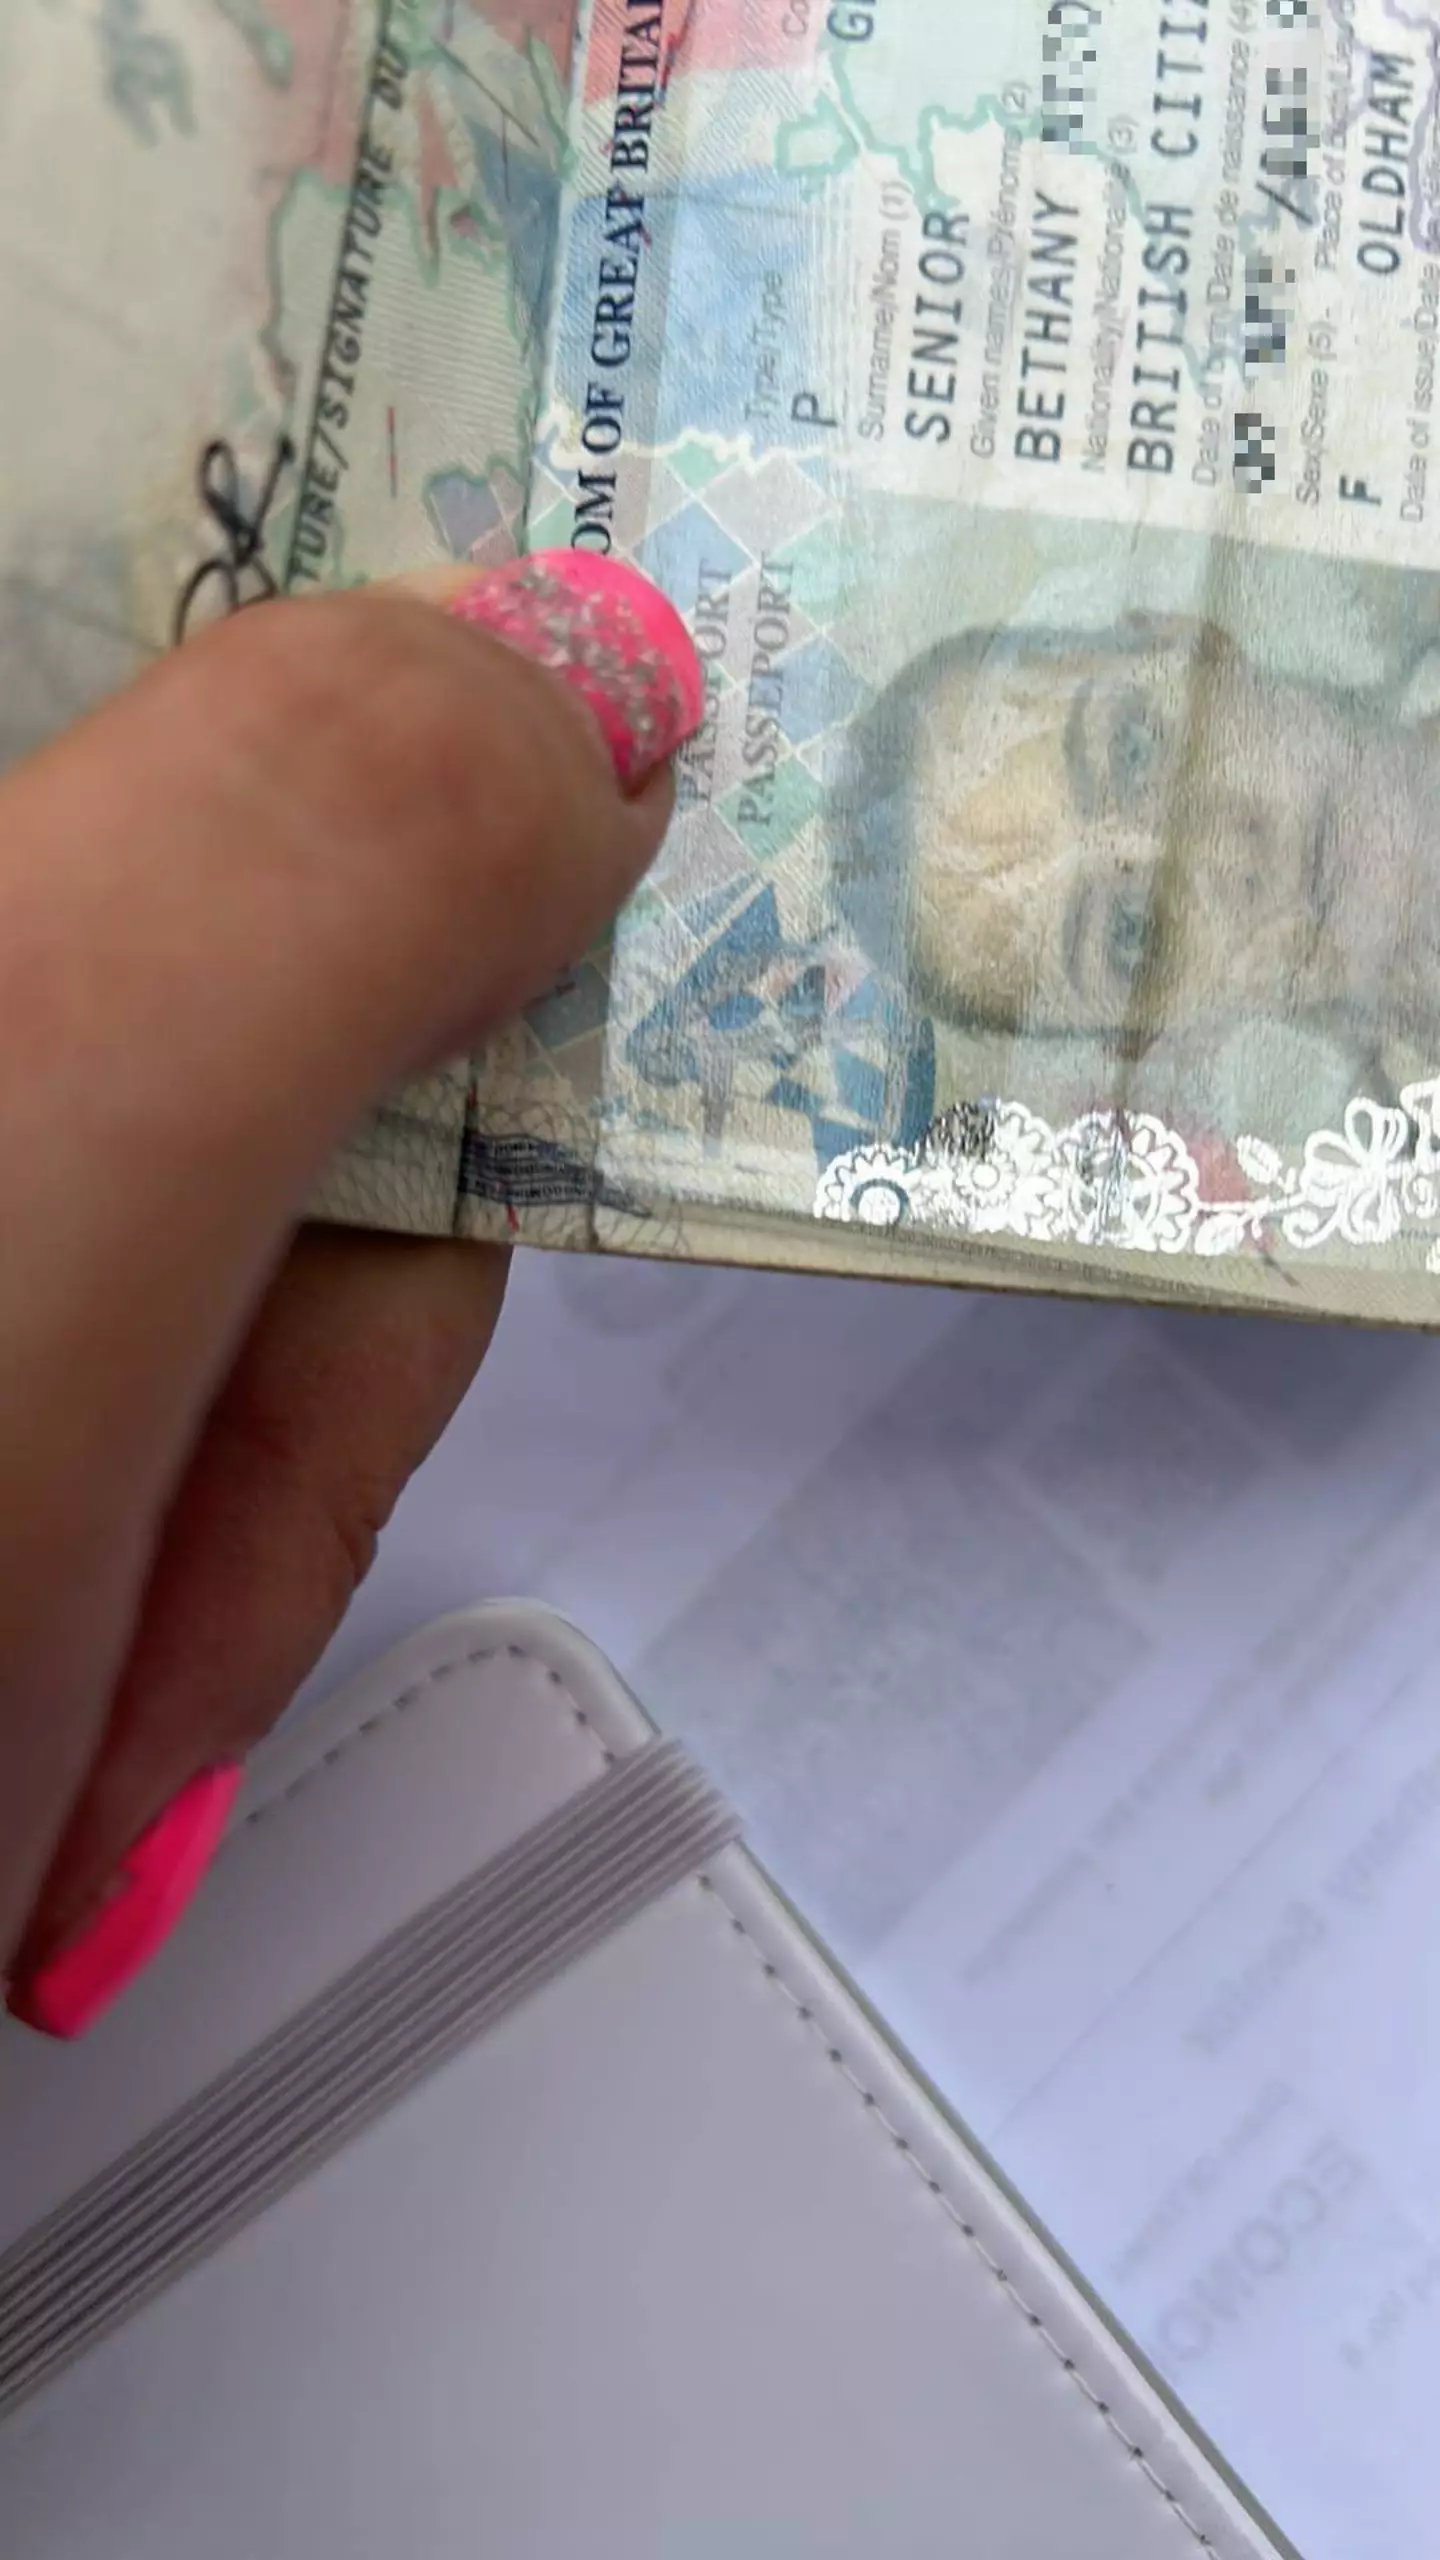 A family from Oldham were forced to miss out on a dream £7k Thailand holiday over a minor passport mistake.